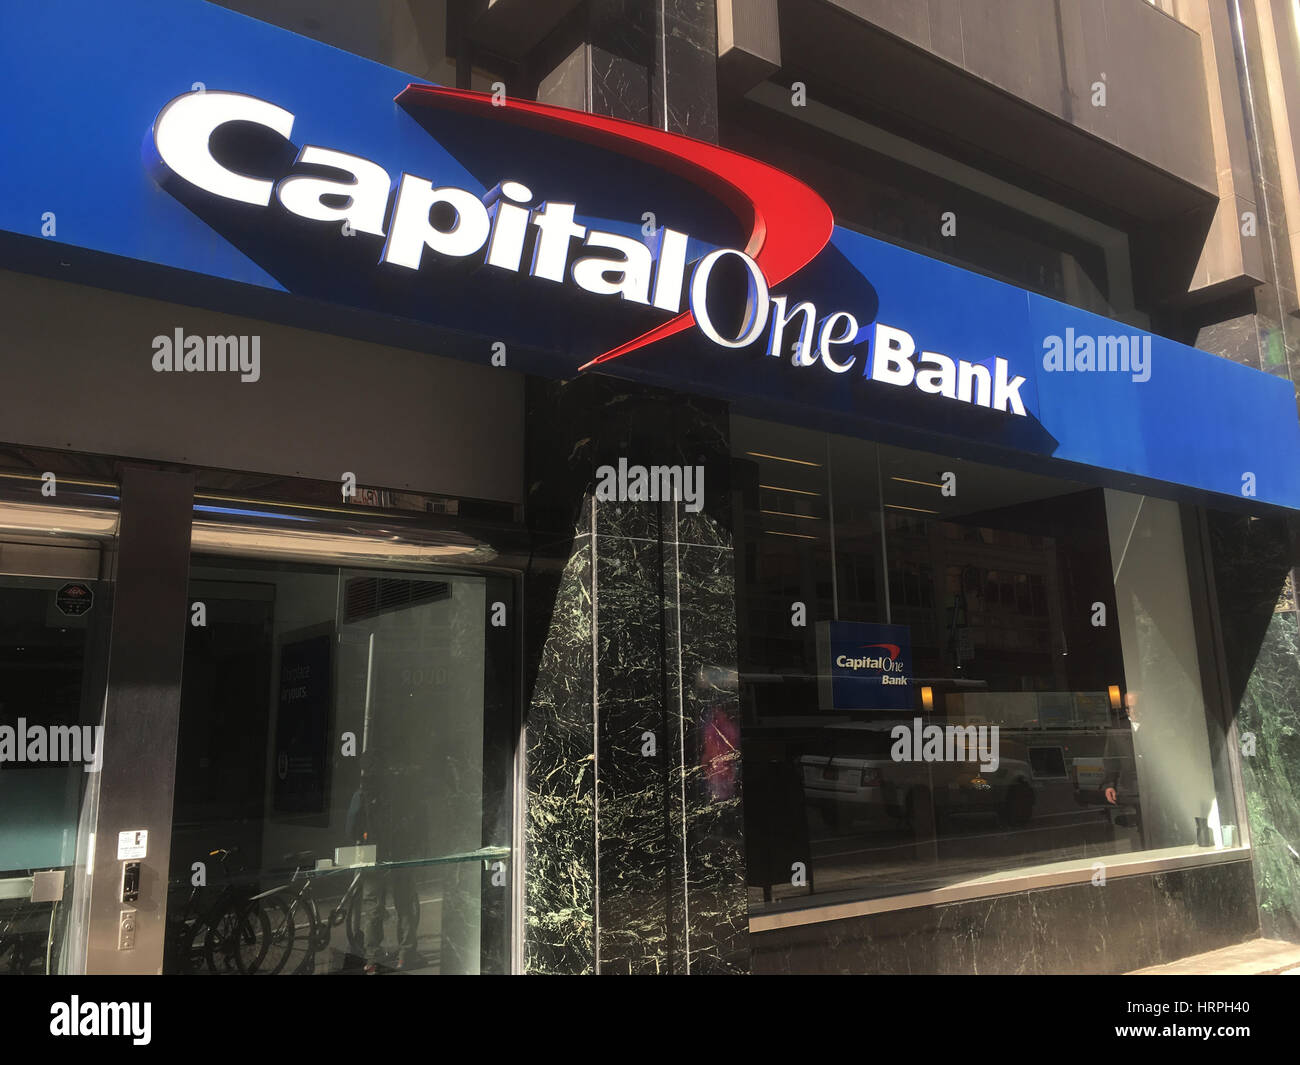 New York City - 28 January 2017: Facade of Capital One Bank Midtown Manhattan location.  Large Capital One Bank logo on the exterior, street view.  No Stock Photo